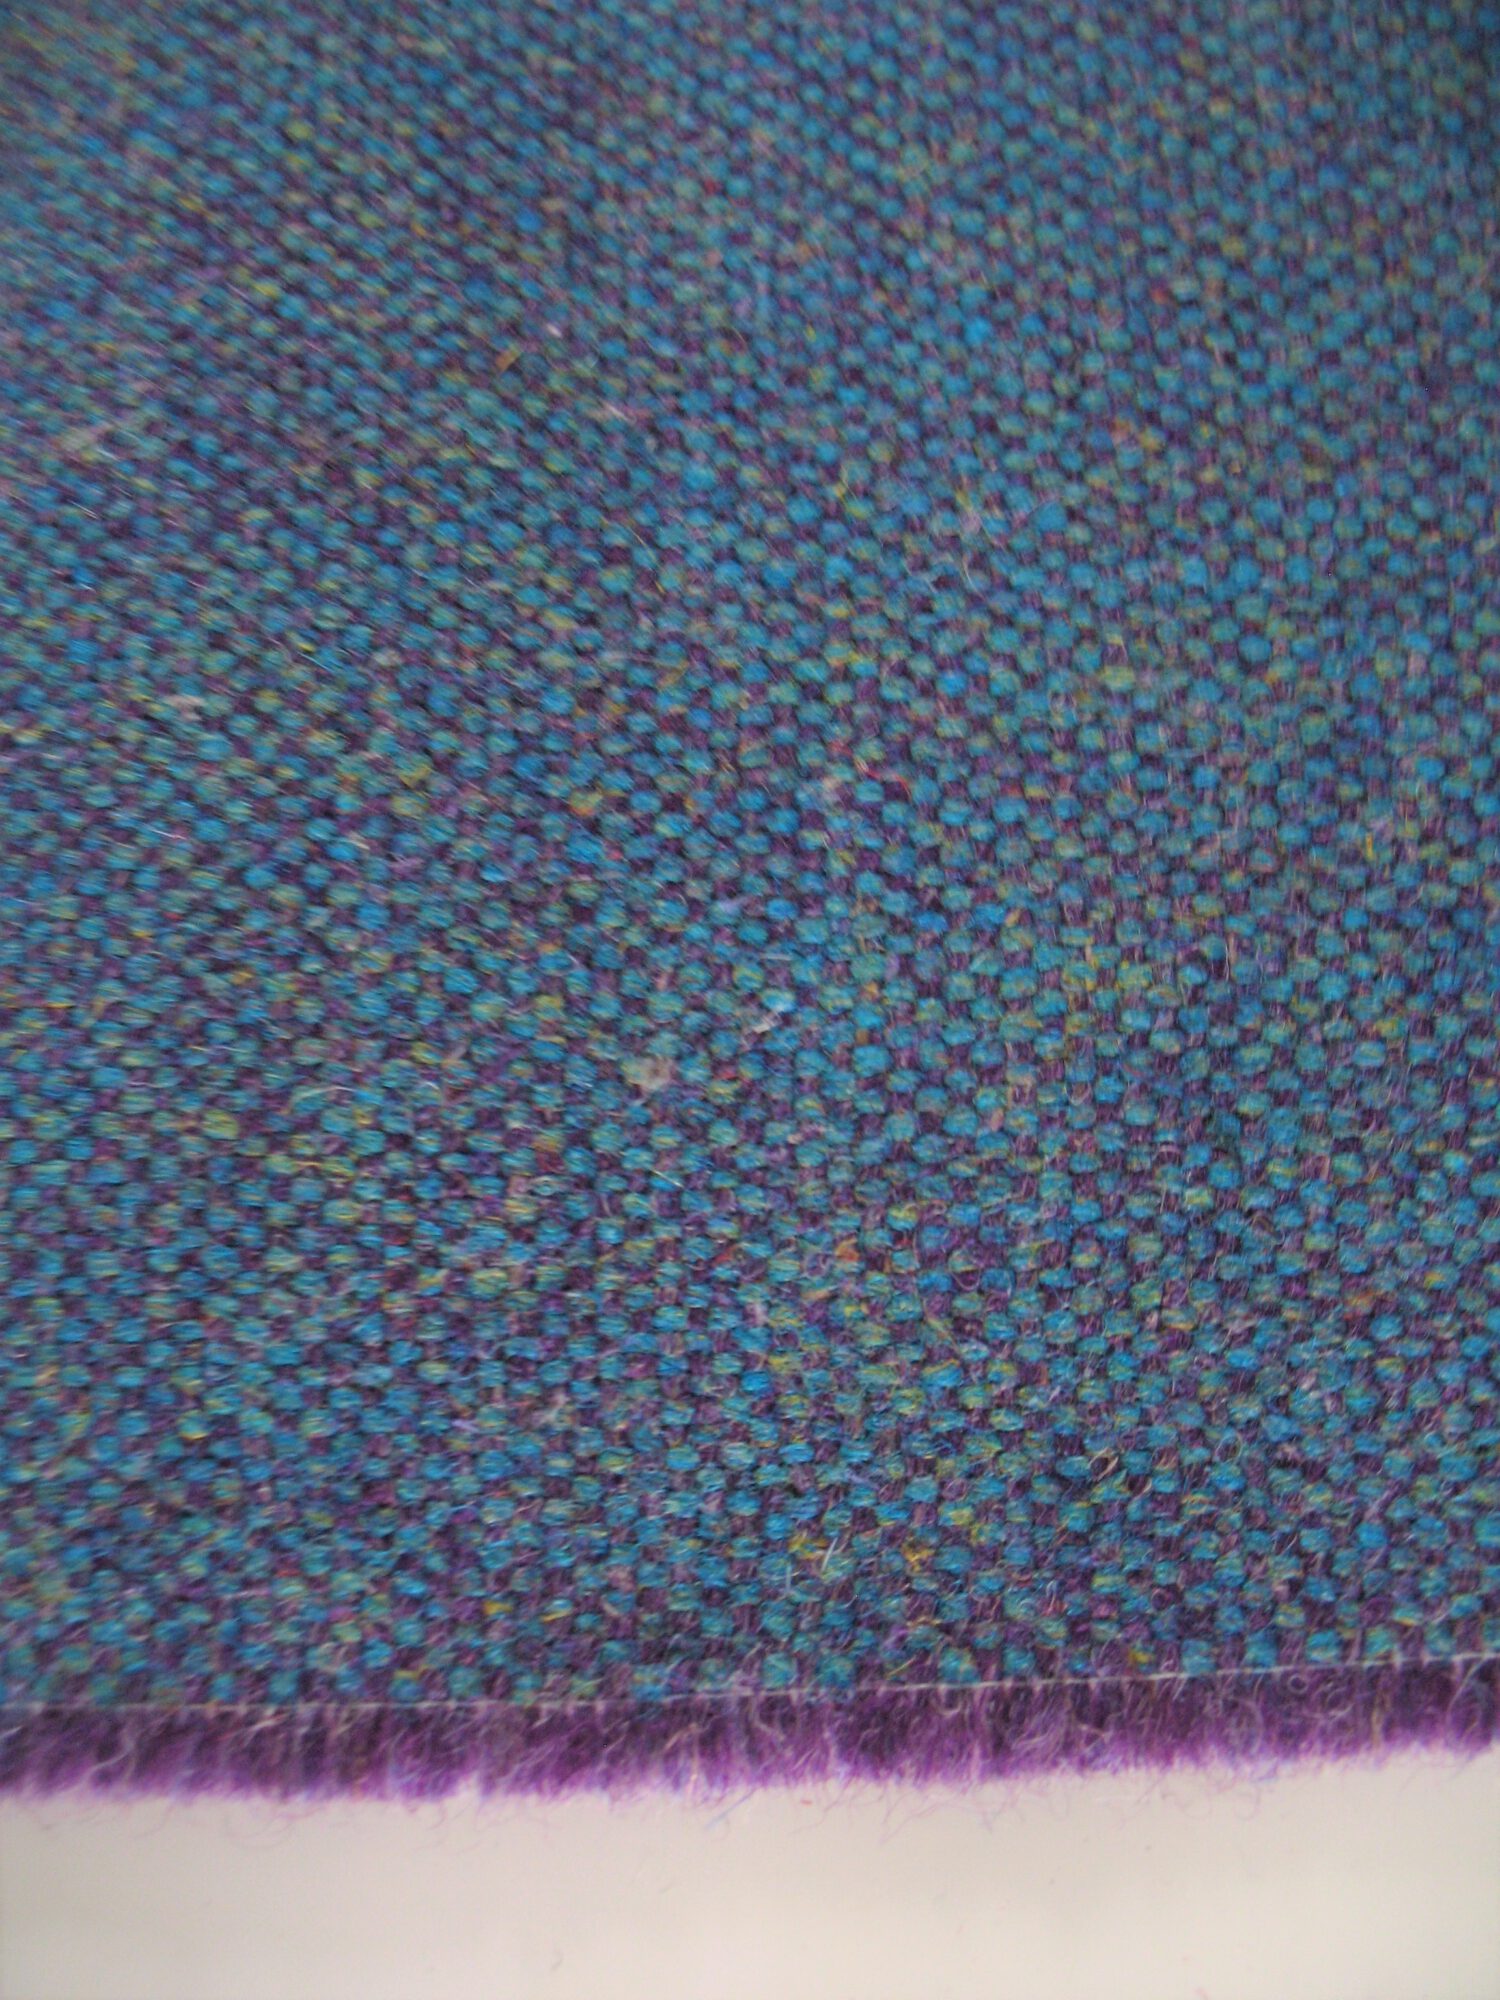 Camira Main Line Flax Russell MLF38 licht paars turquoise